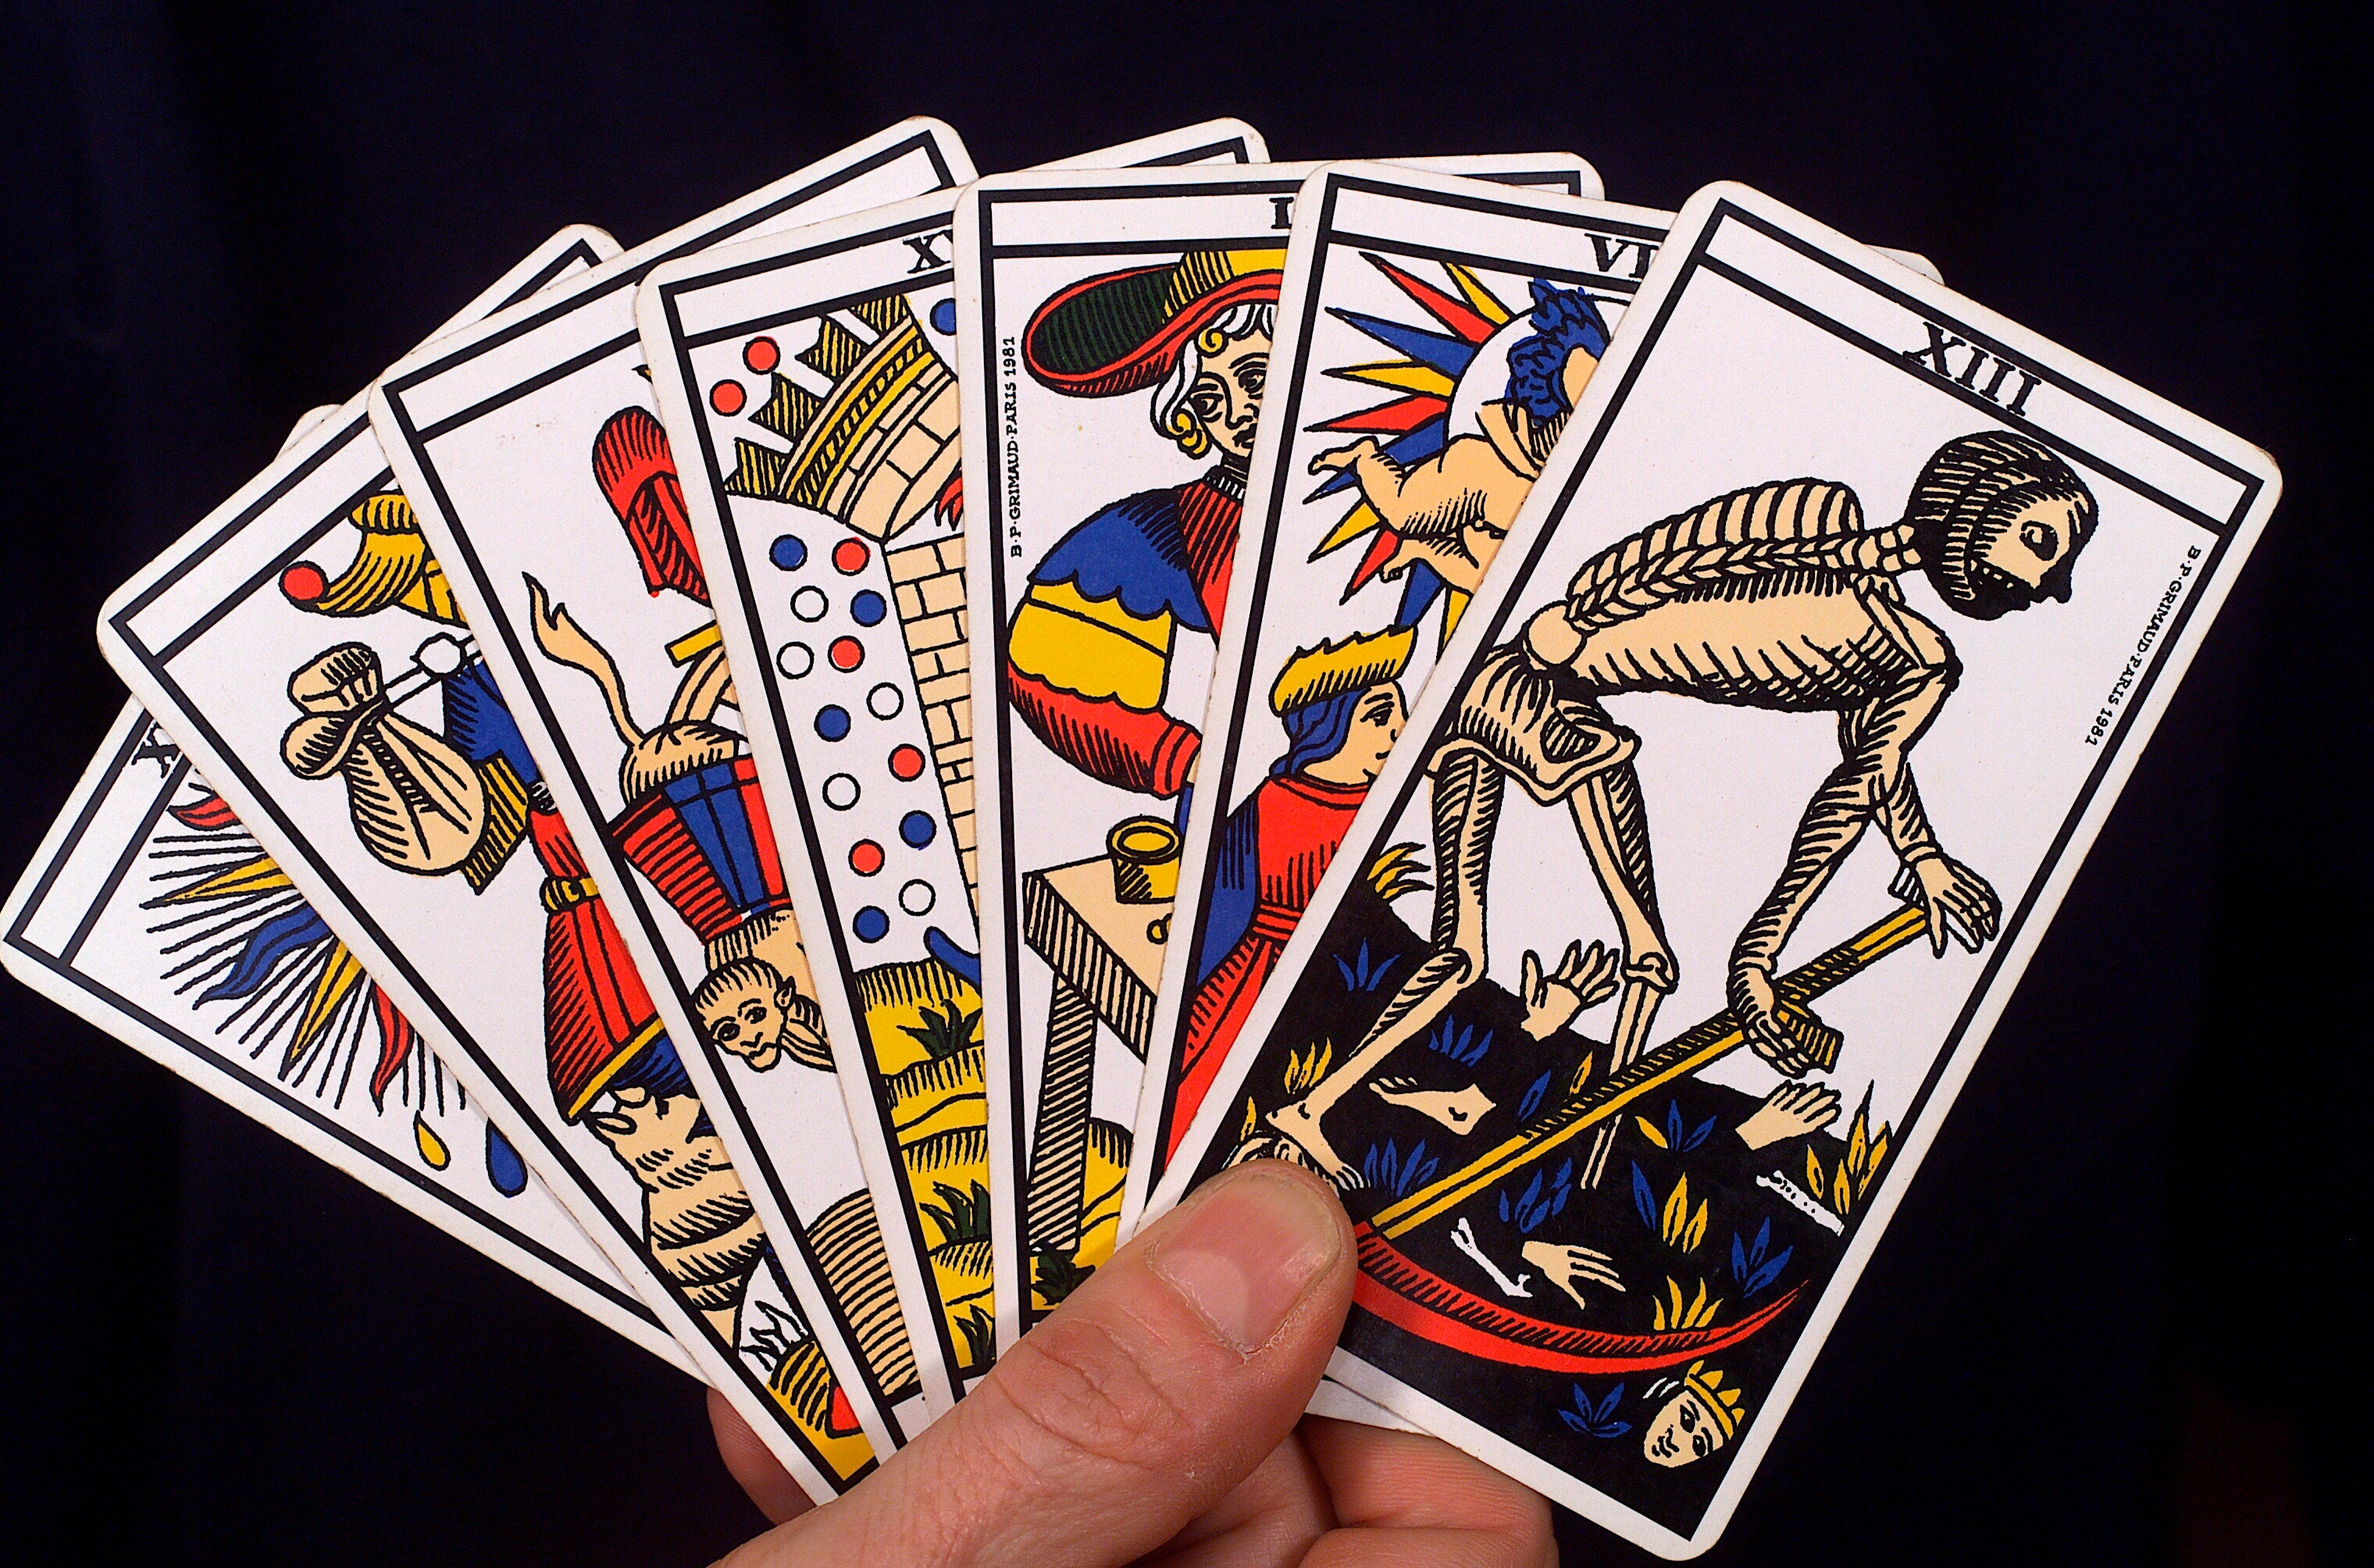 astrology and tarot cards are examples of what